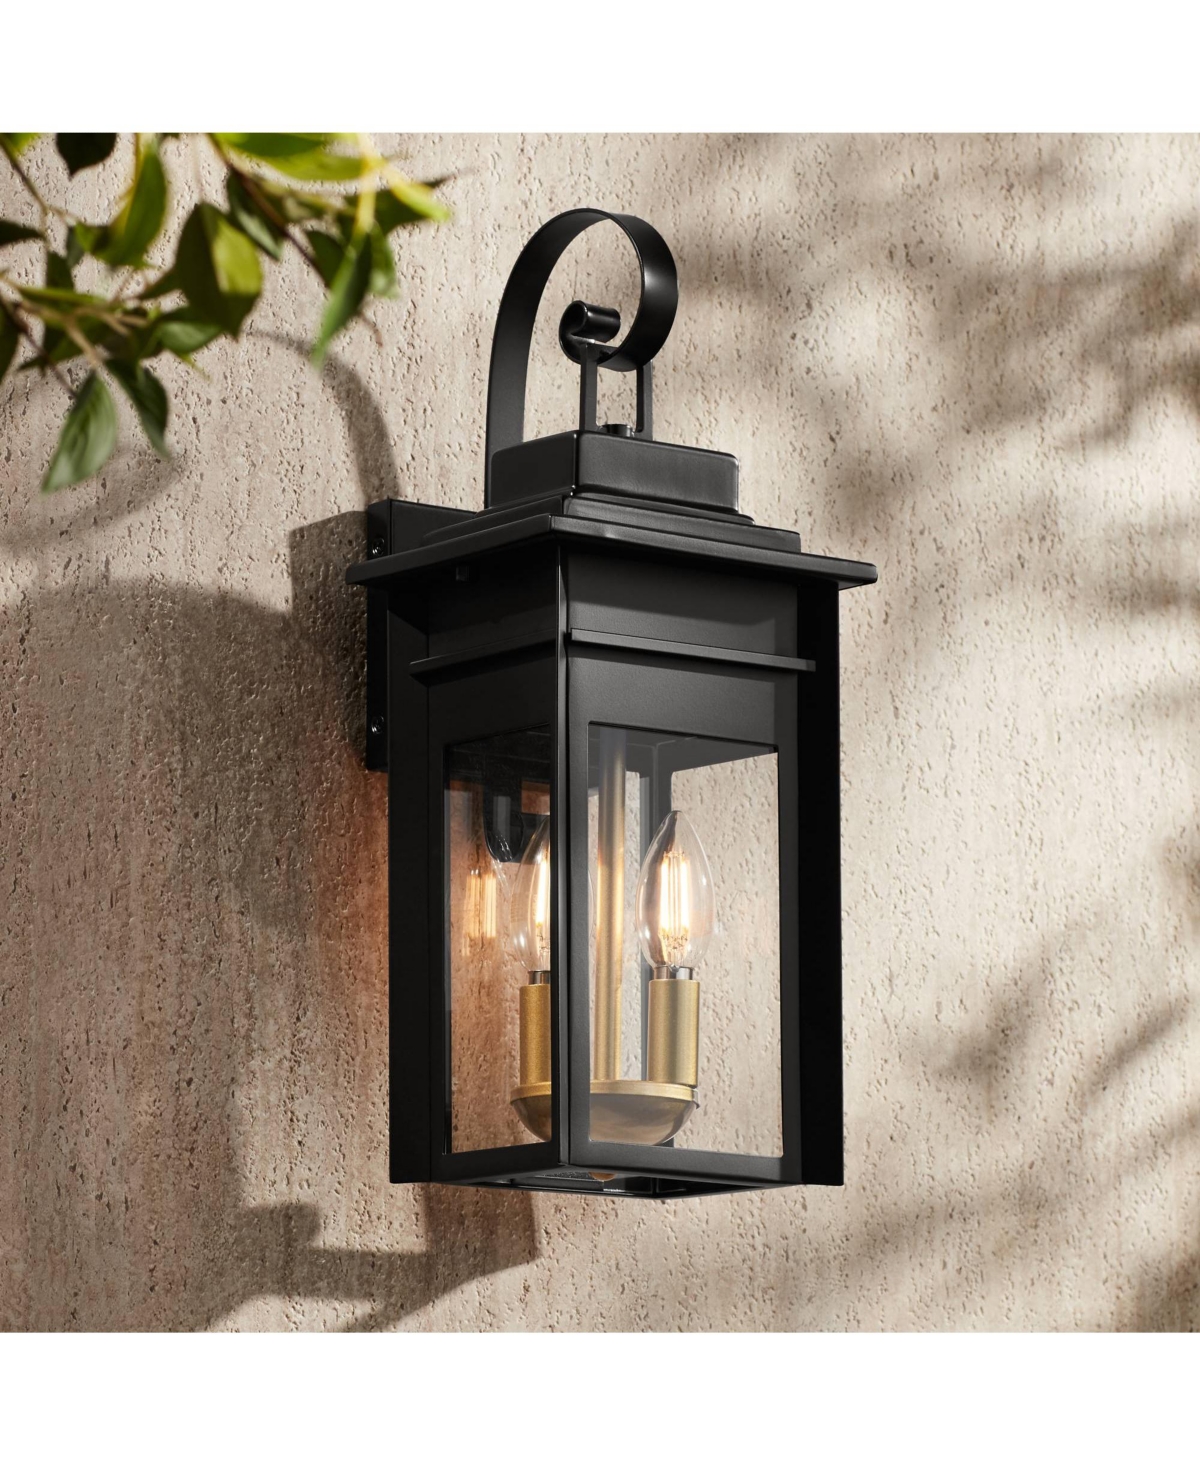 Bransford Rustic Farmhouse Outdoor Wall Light Fixture Black 2-Light 17" Clear Glass Shade for Exterior Barn Deck House Porch Yard Patio Outside Garage